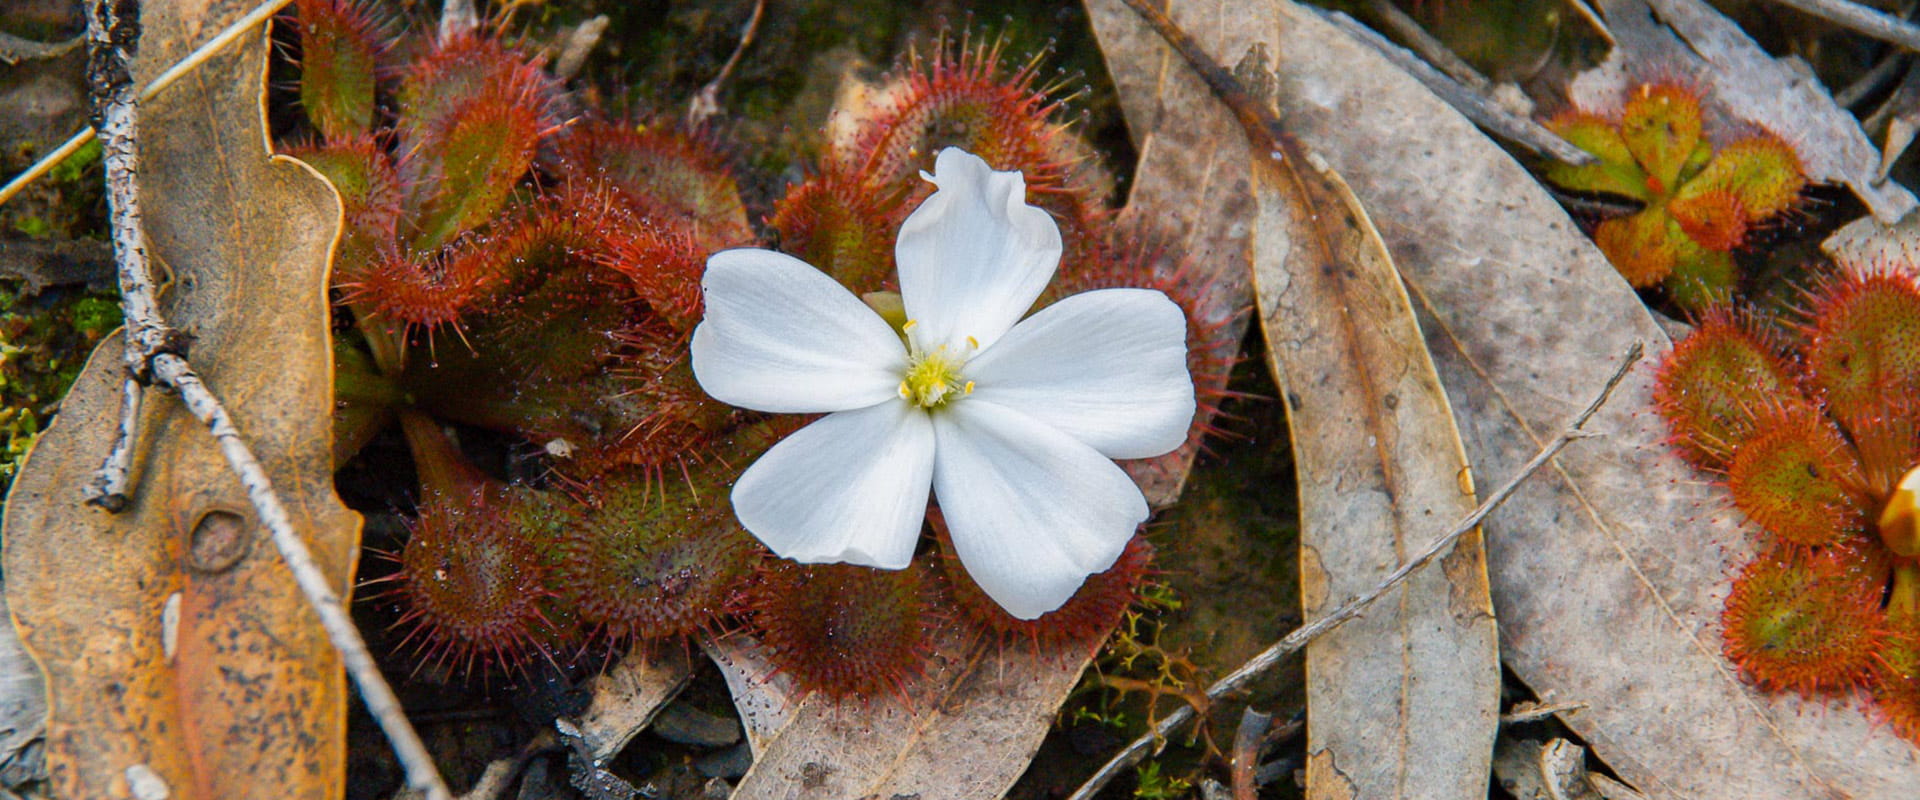 A white wildflower blooms amongst a rugged bushlands foliage